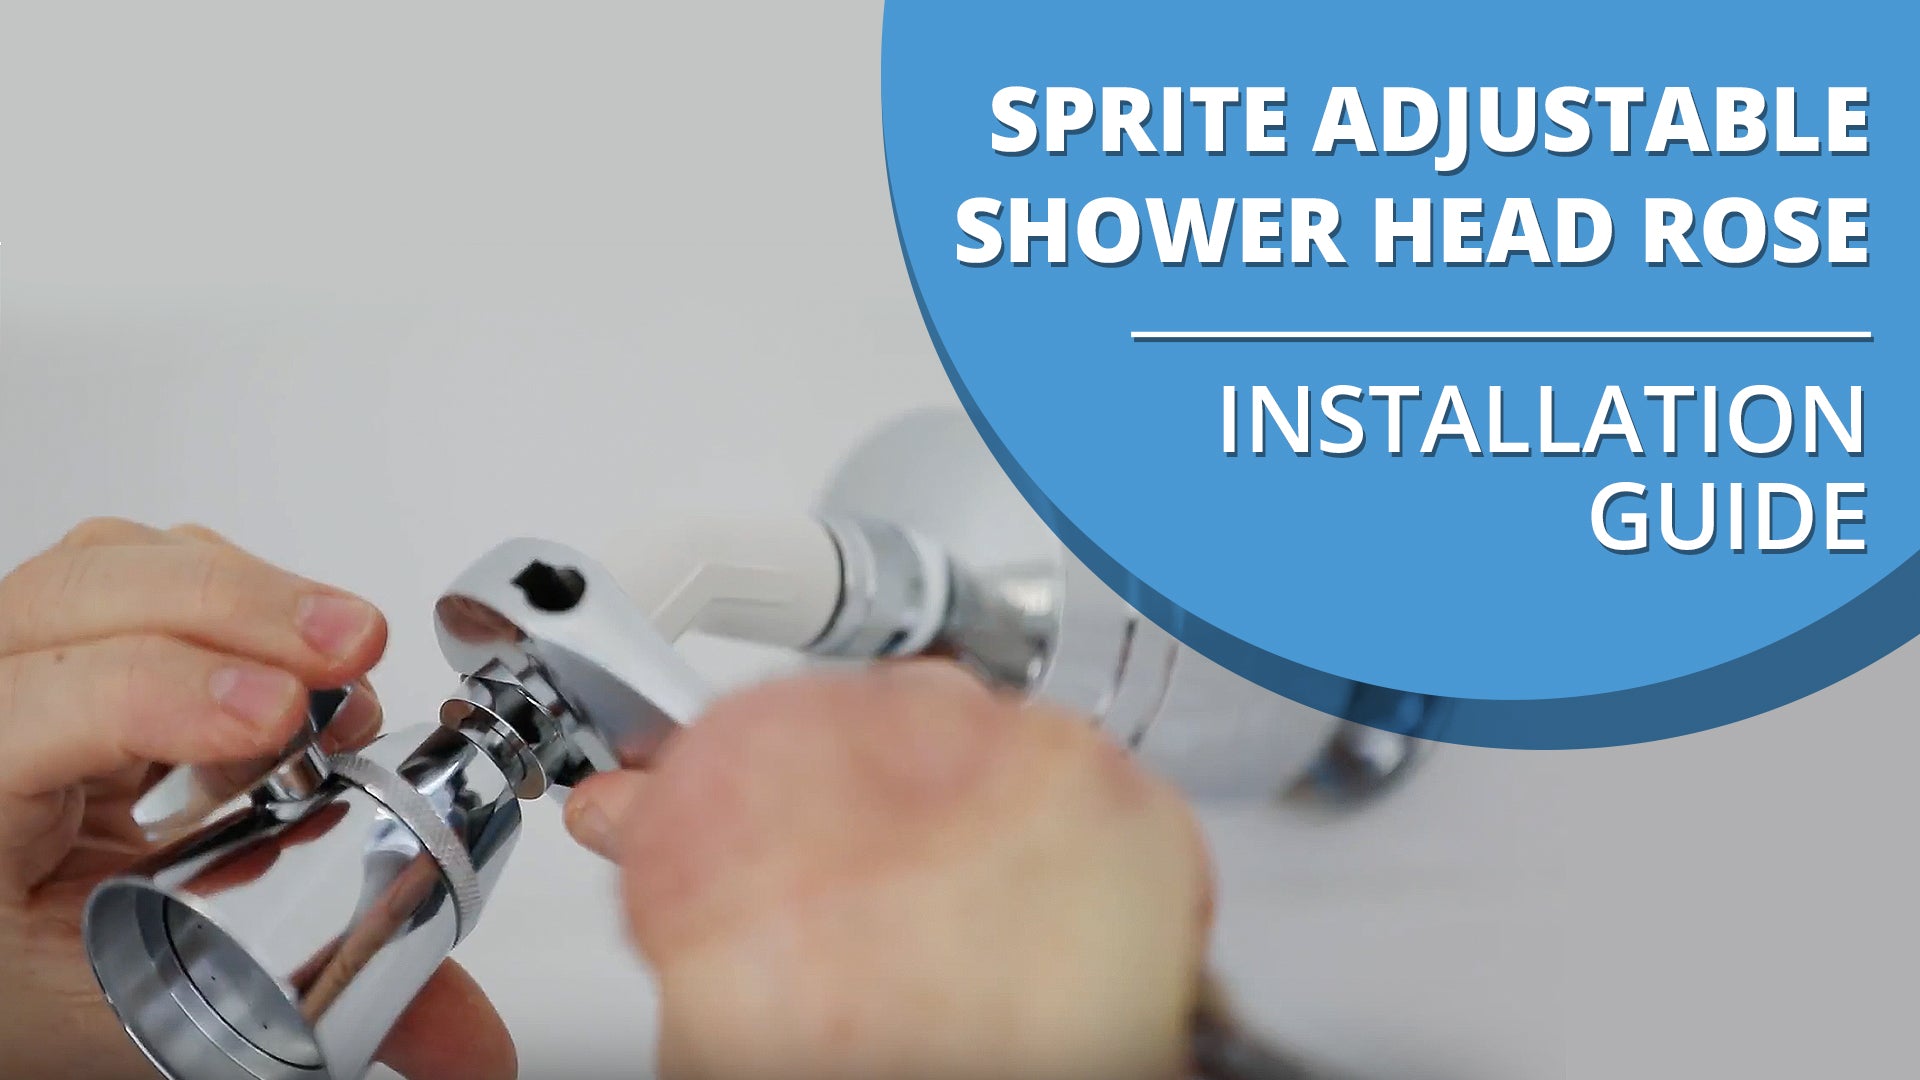 How To Install Sprite Adjustable Shower Head Rose [VIDEO]